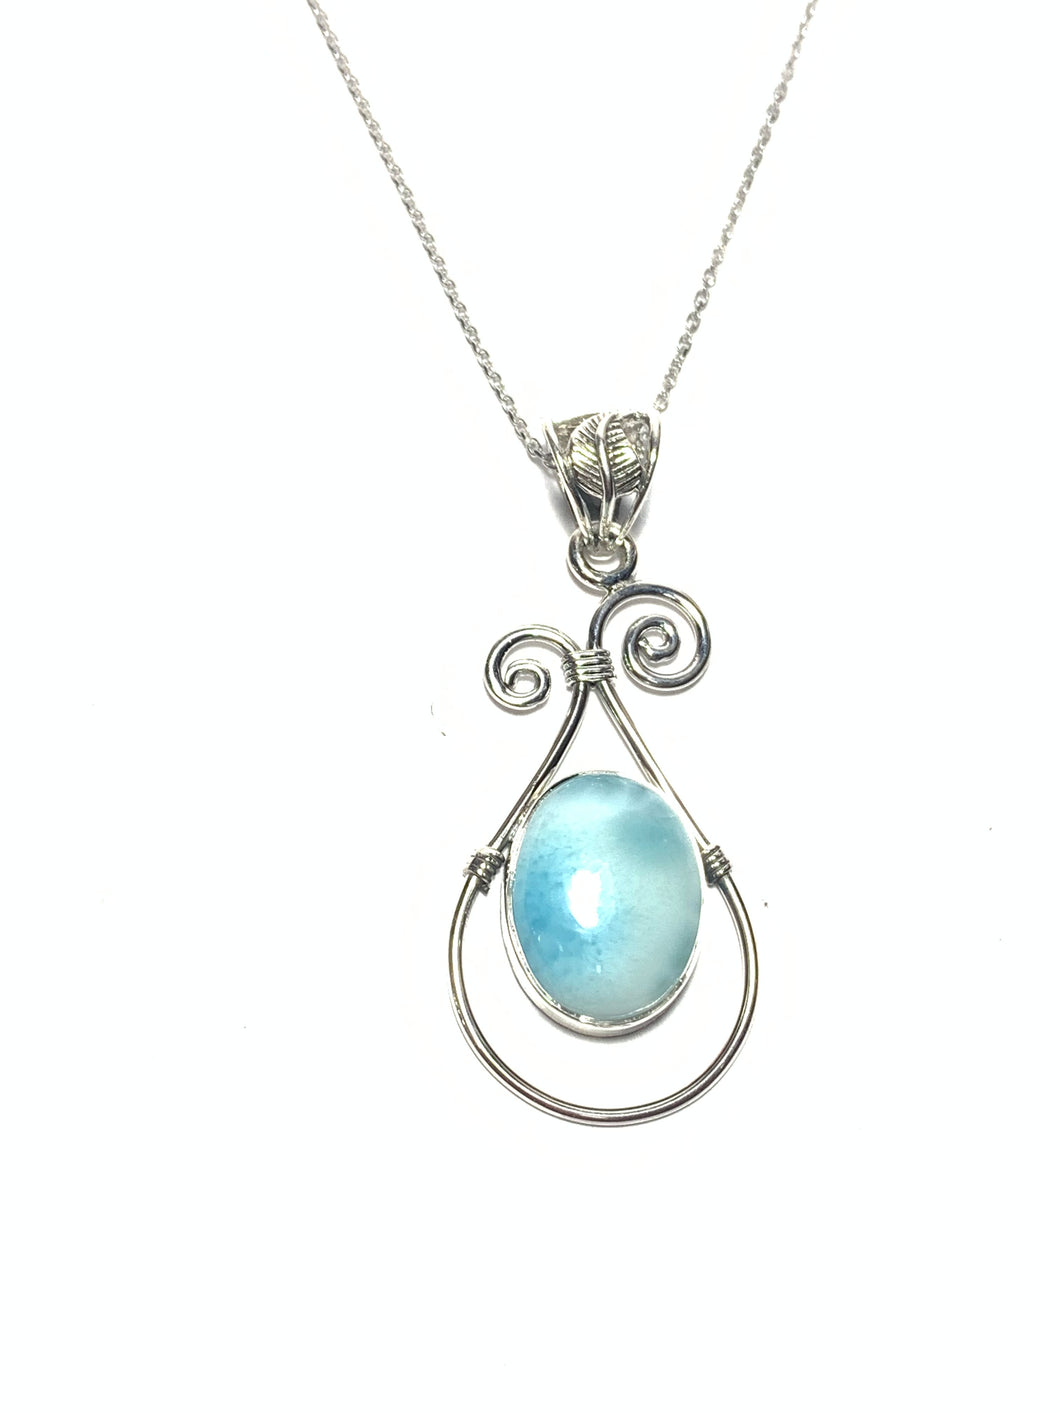 *Sterling Oval Swirl Necklace